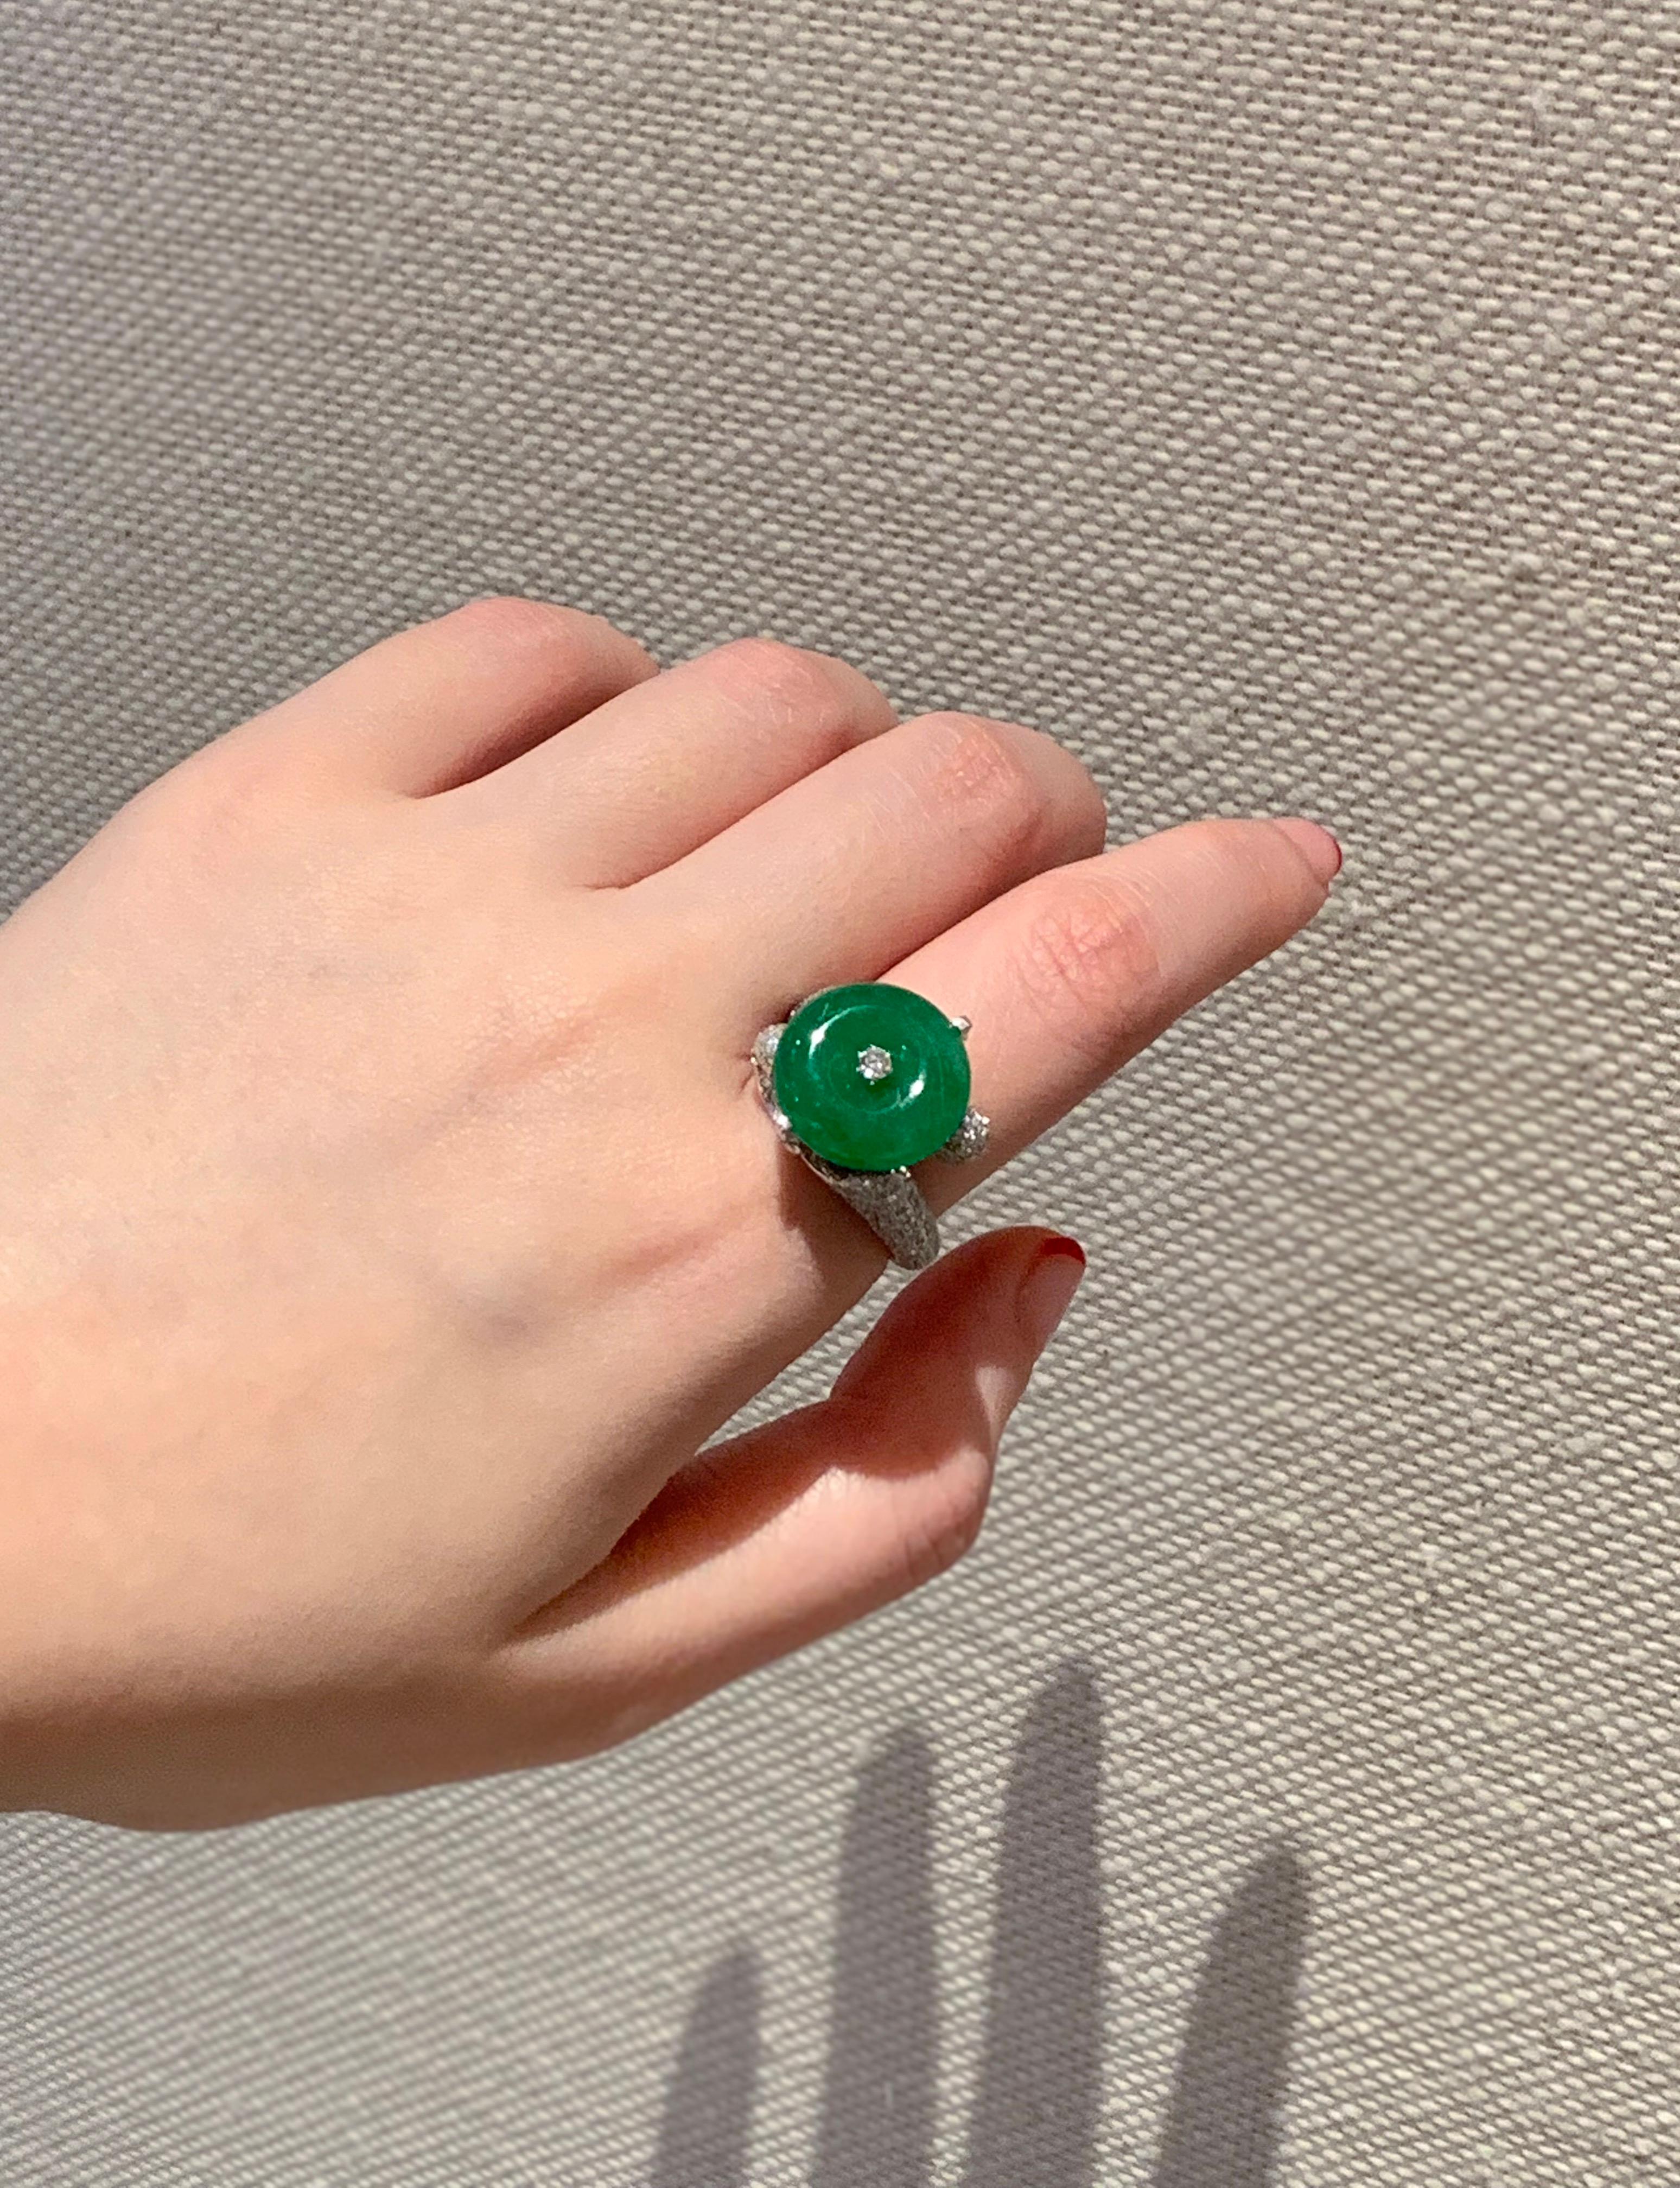 Jade, the stone that protects and nourishes the heart energy is often worn in Chinese culture to calm its wearer. As an engagement ring, it is the perfect symbol to protects one's bond and commitment. This natural A-grade, lush green 'peace buckle'